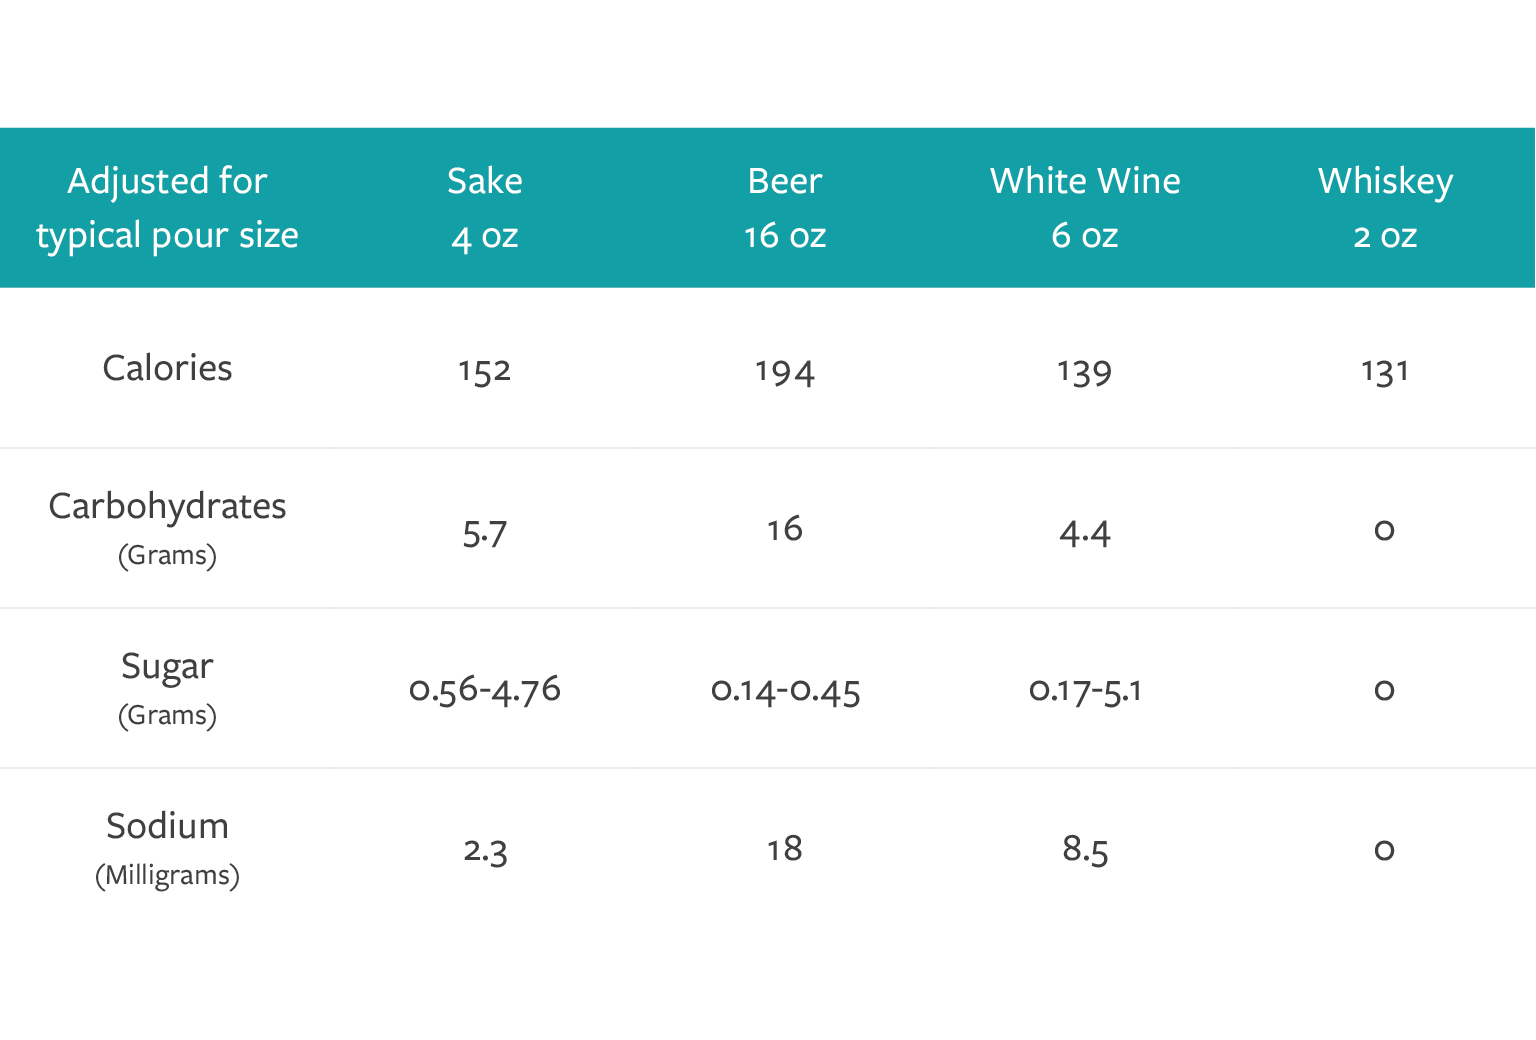 A chart showing values adjusted for typical pour size